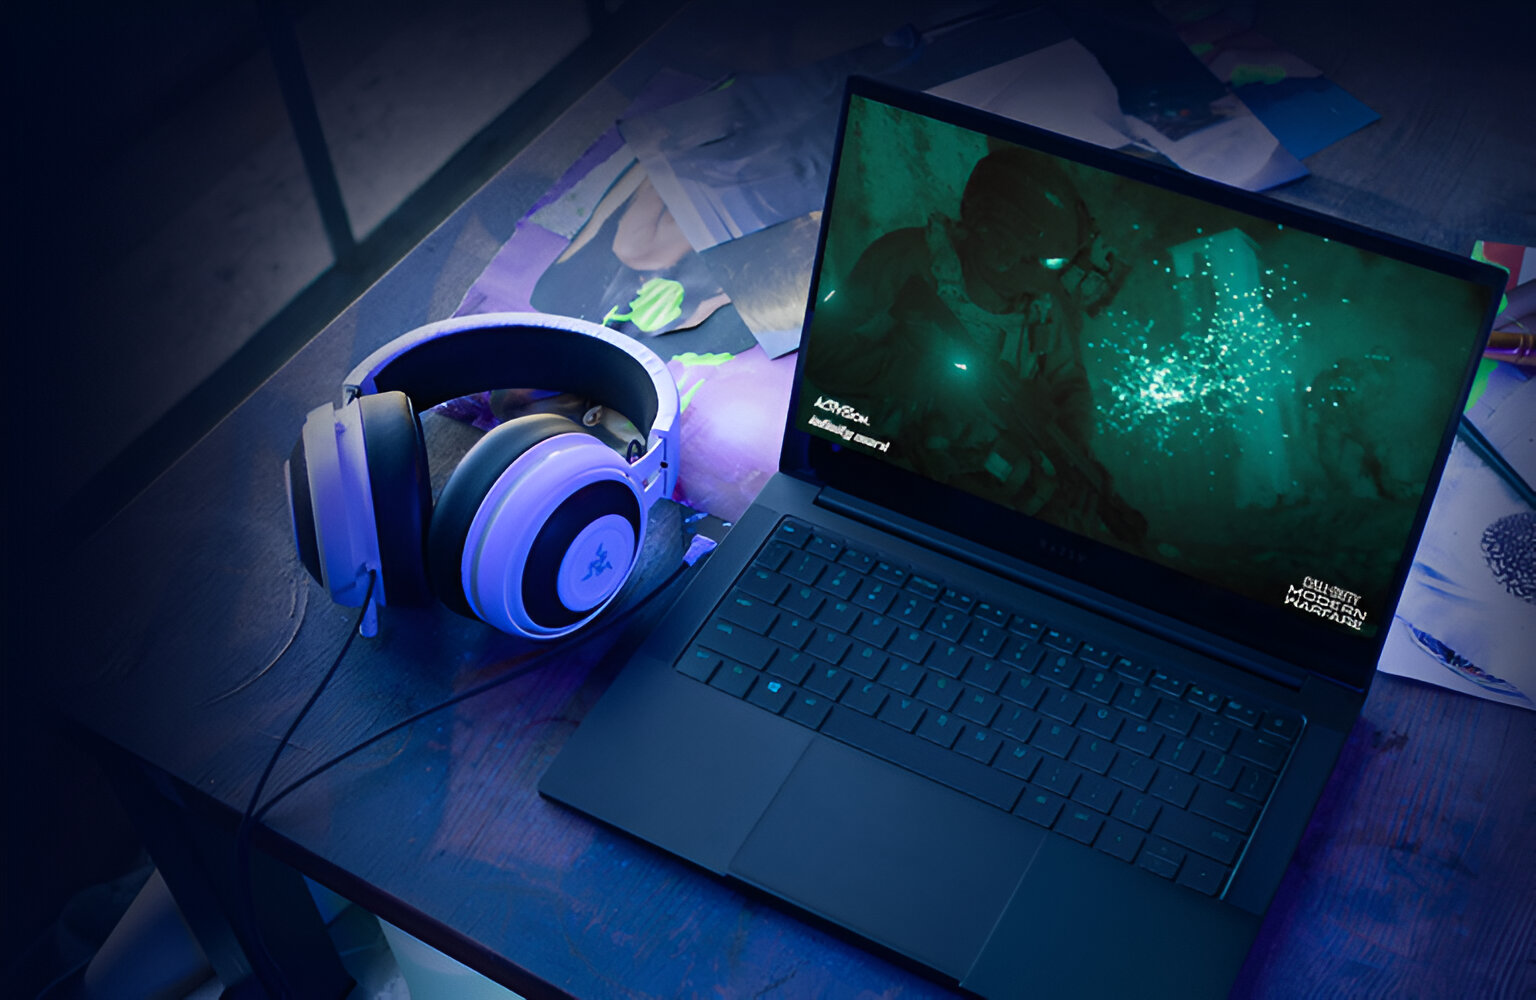 What Graphics Come With The Razer Blade Stealth Ultrabook